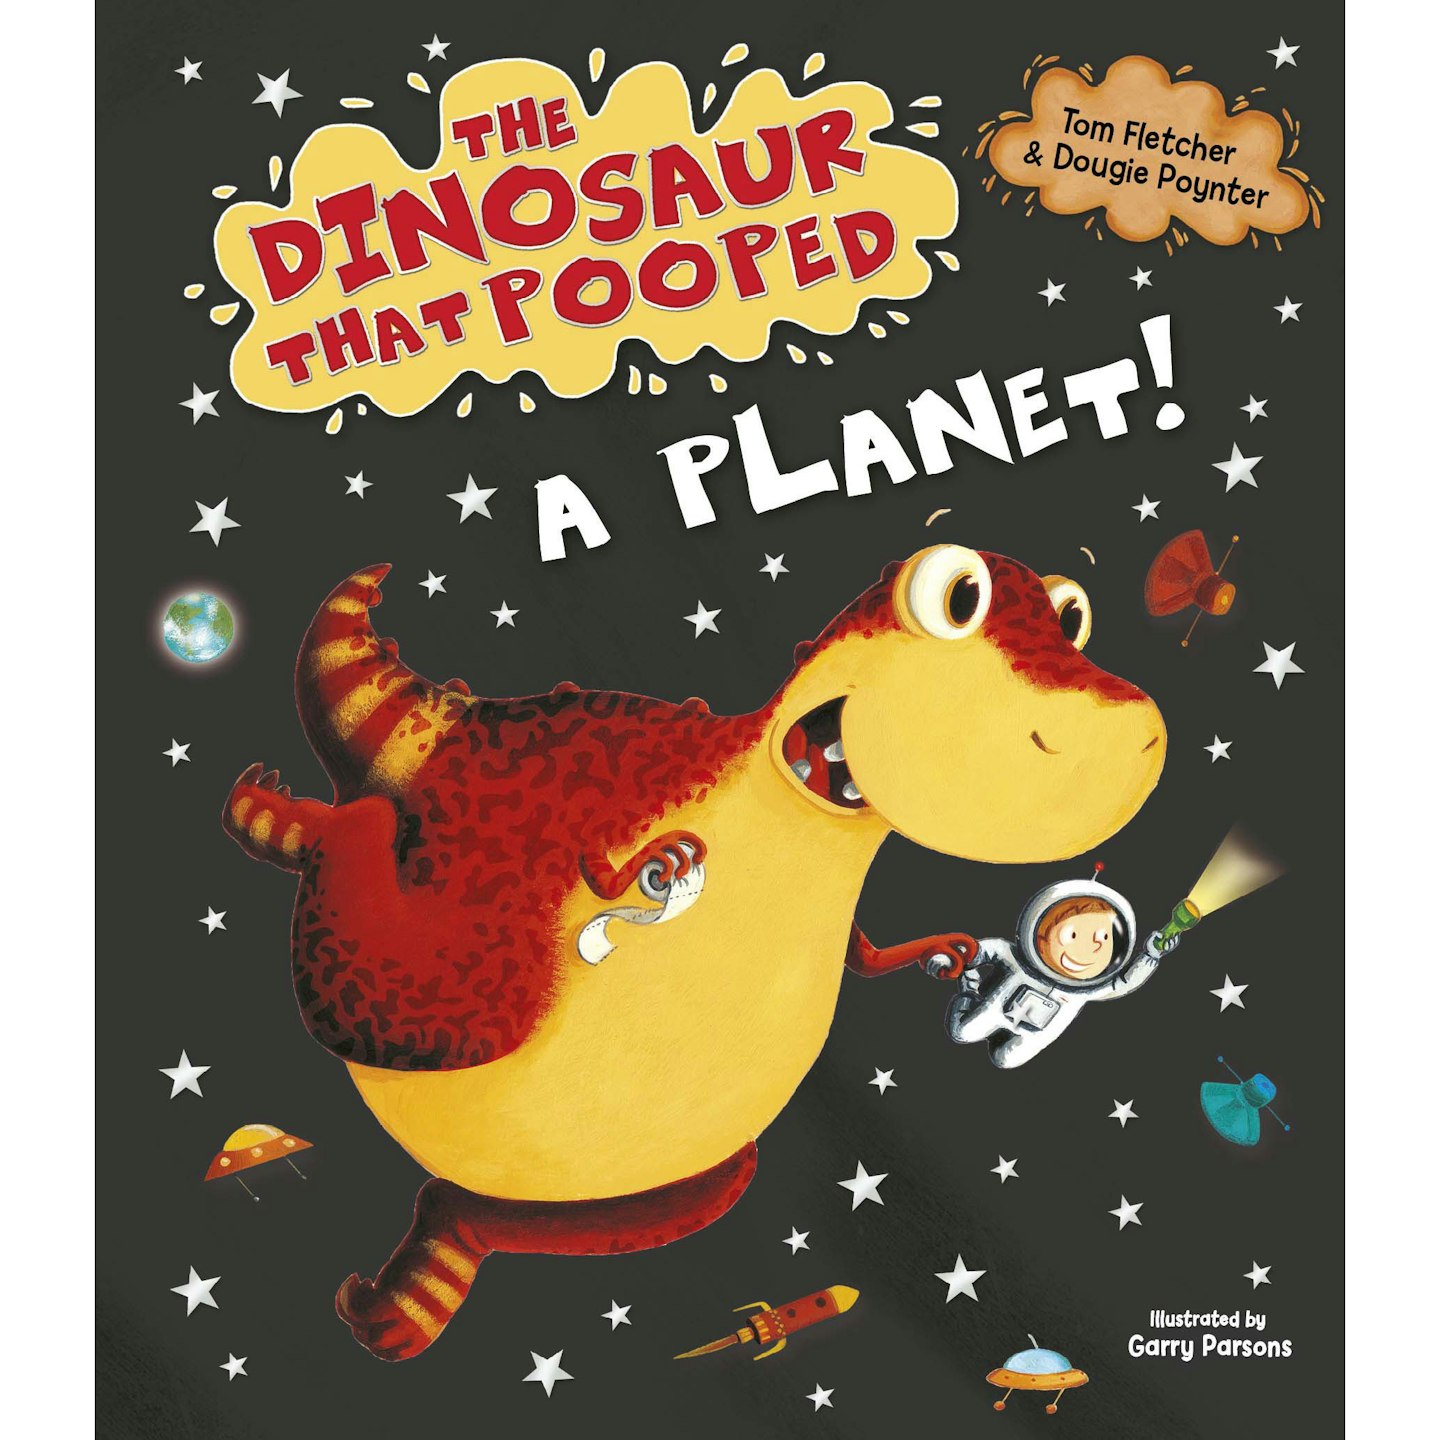 The Dinosaur That Pooped A Planet! by Tom Fletcher, Dougie Poynter and Garry Parsons